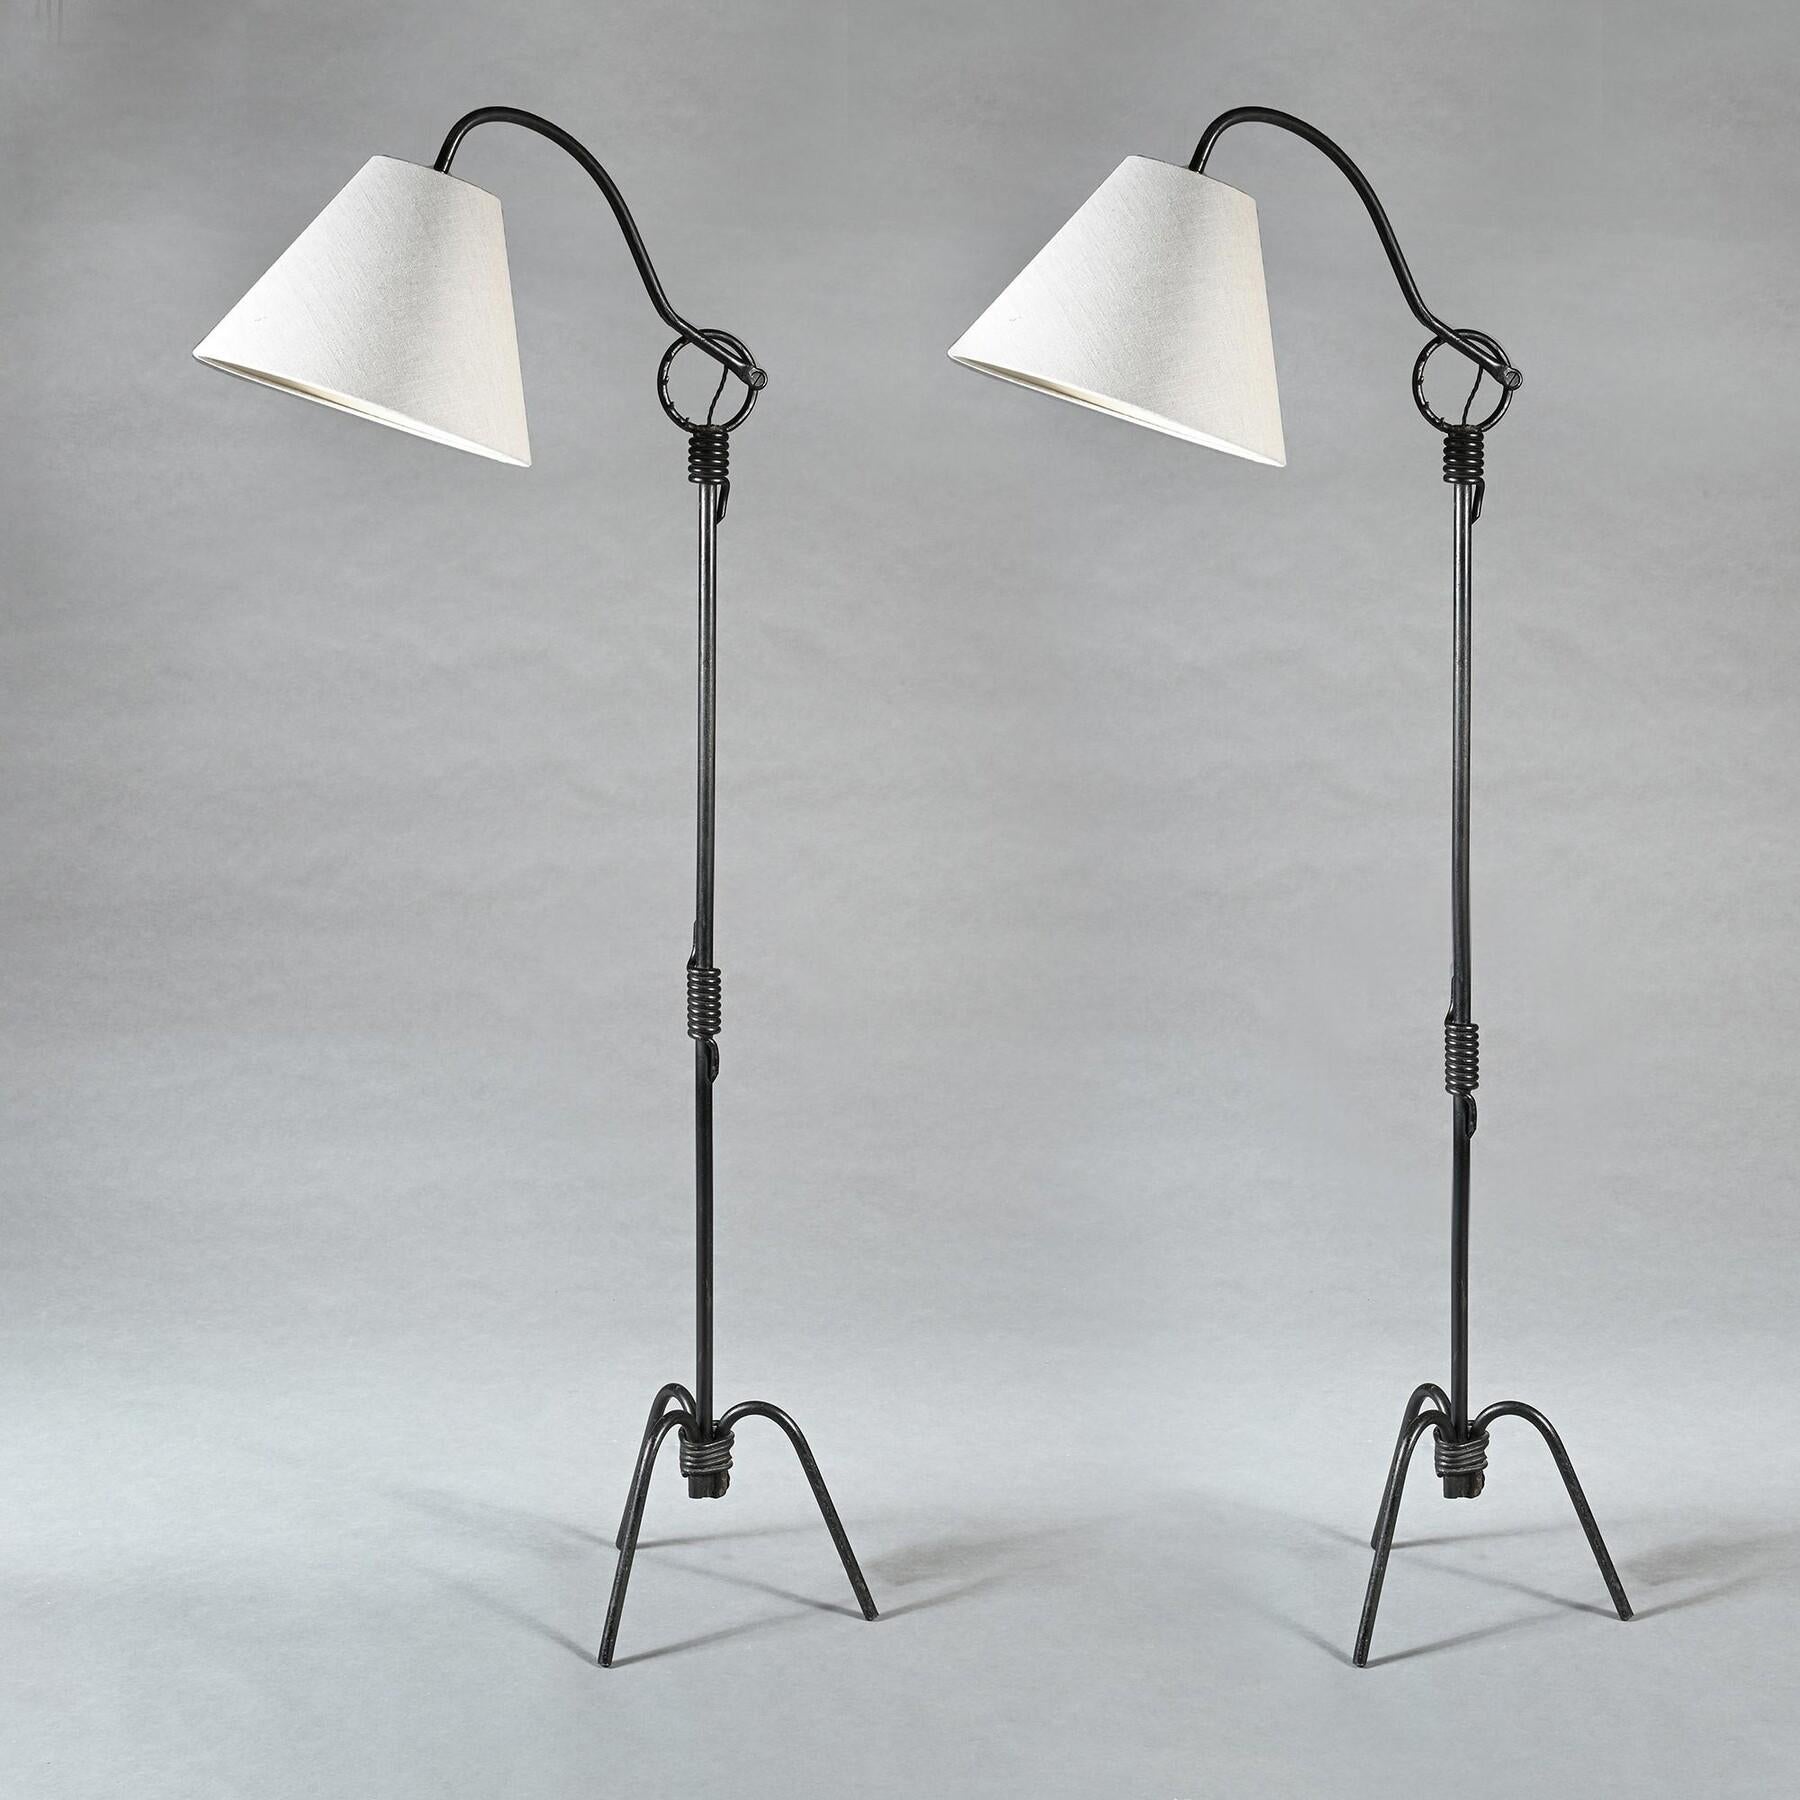 A Matched Pair of Jean Royère adjustable Iron standing Floor Lamp

France Paris circa 1940’s

Both in wonderful original condition by one of the most sought after mid 20th century French furniture and interior designers Jean Royère (1902-1981). 
The